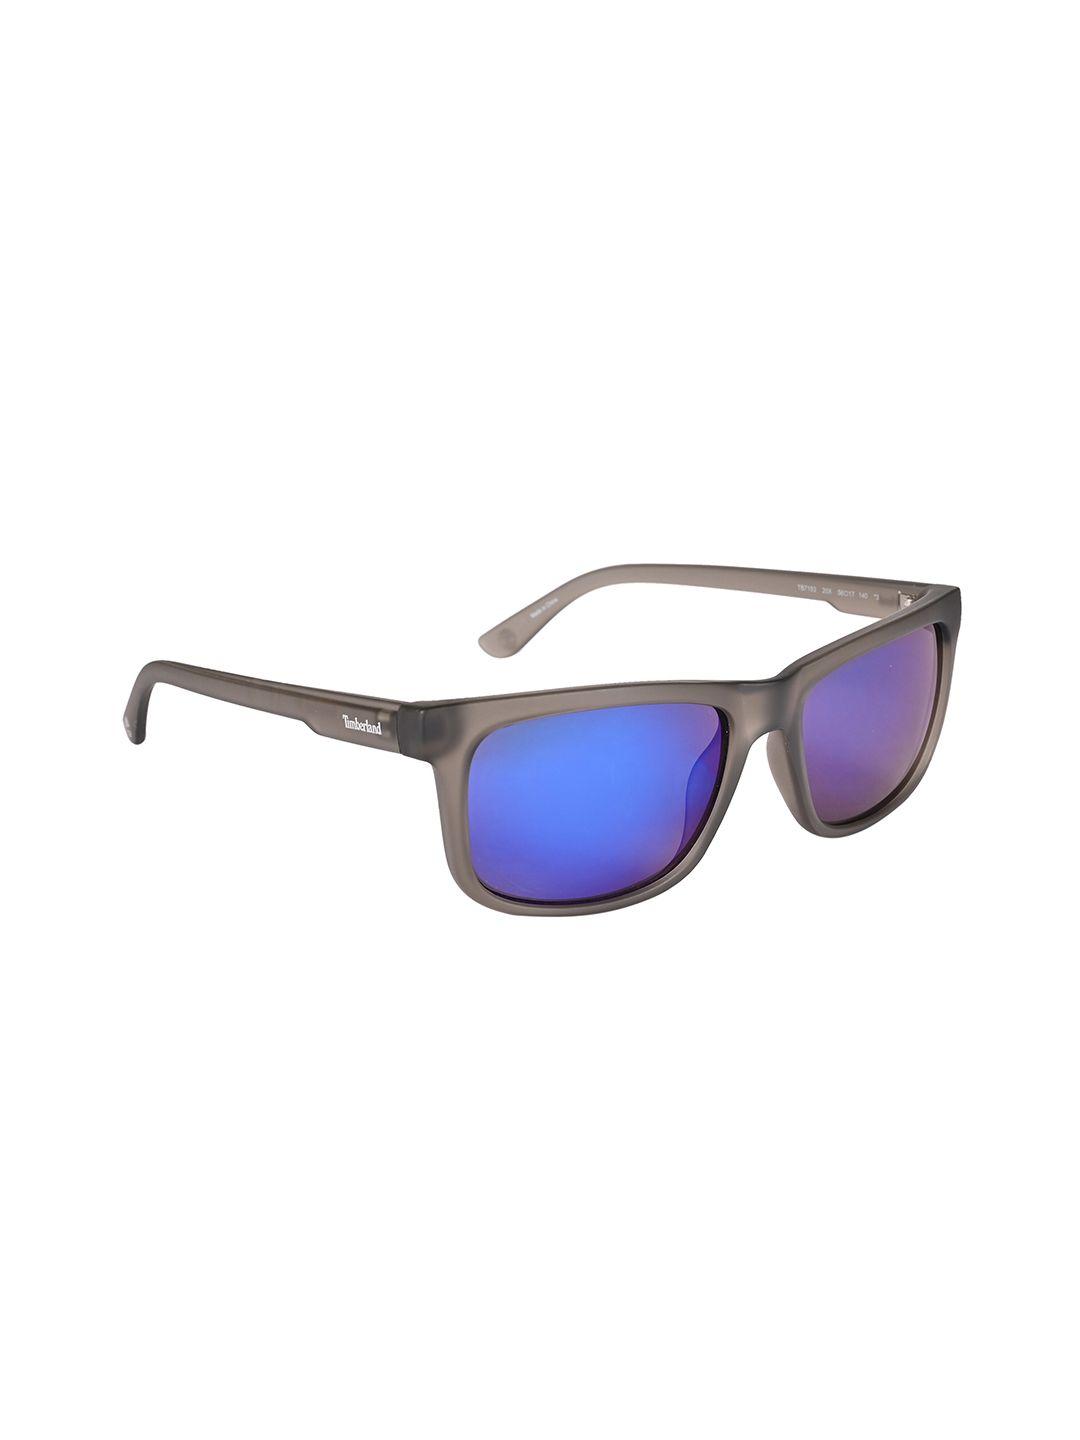 timberland men square sunglasses with uv protected lens